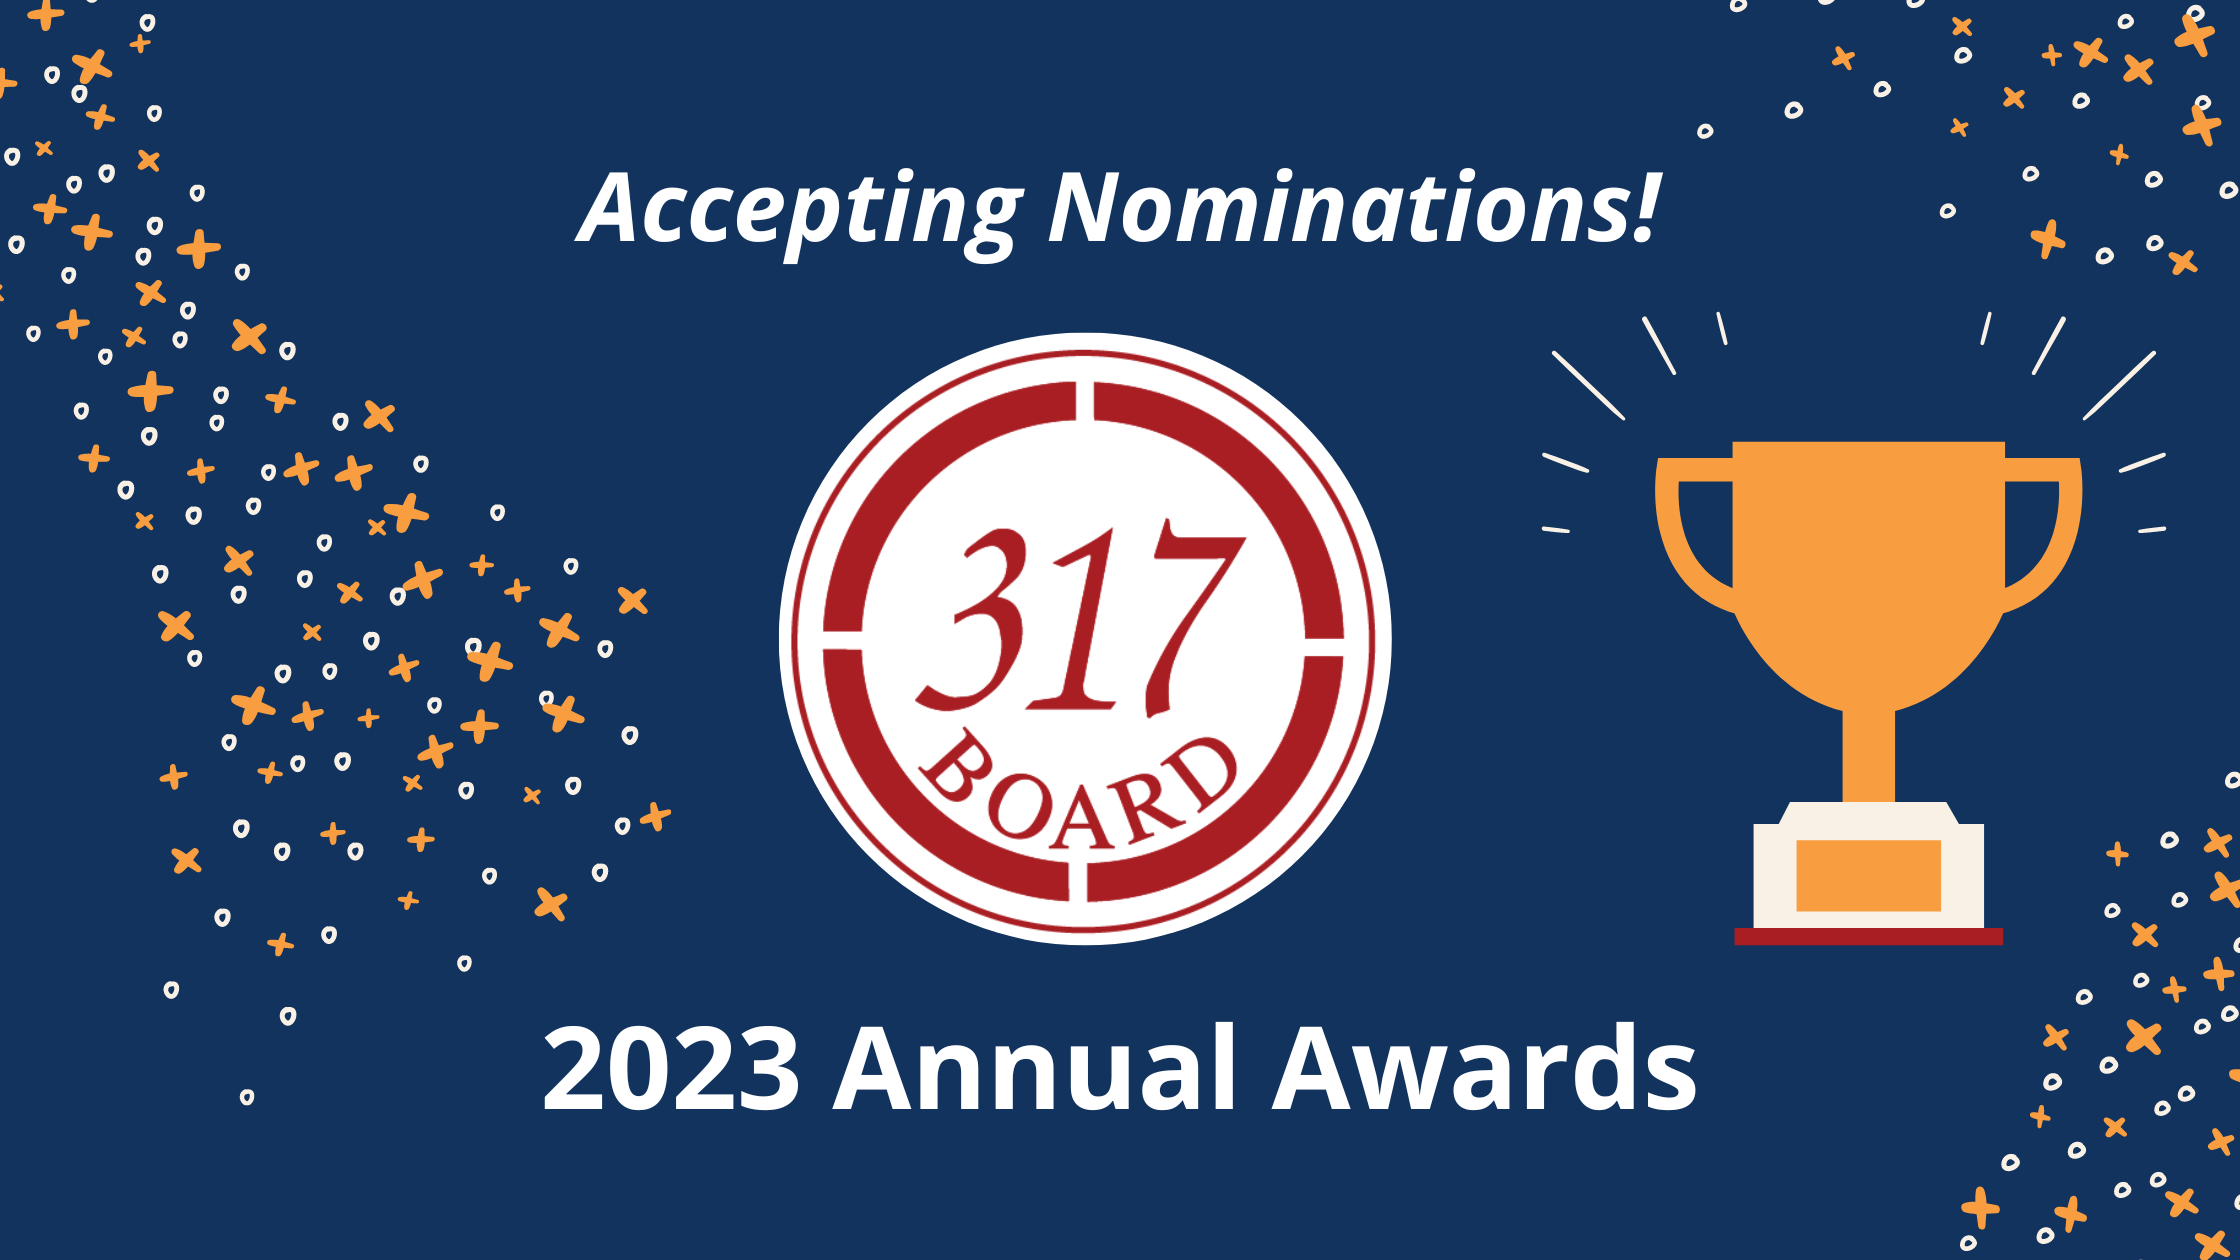 Accepting Nominations! 317 Board 2023 Annual Awards